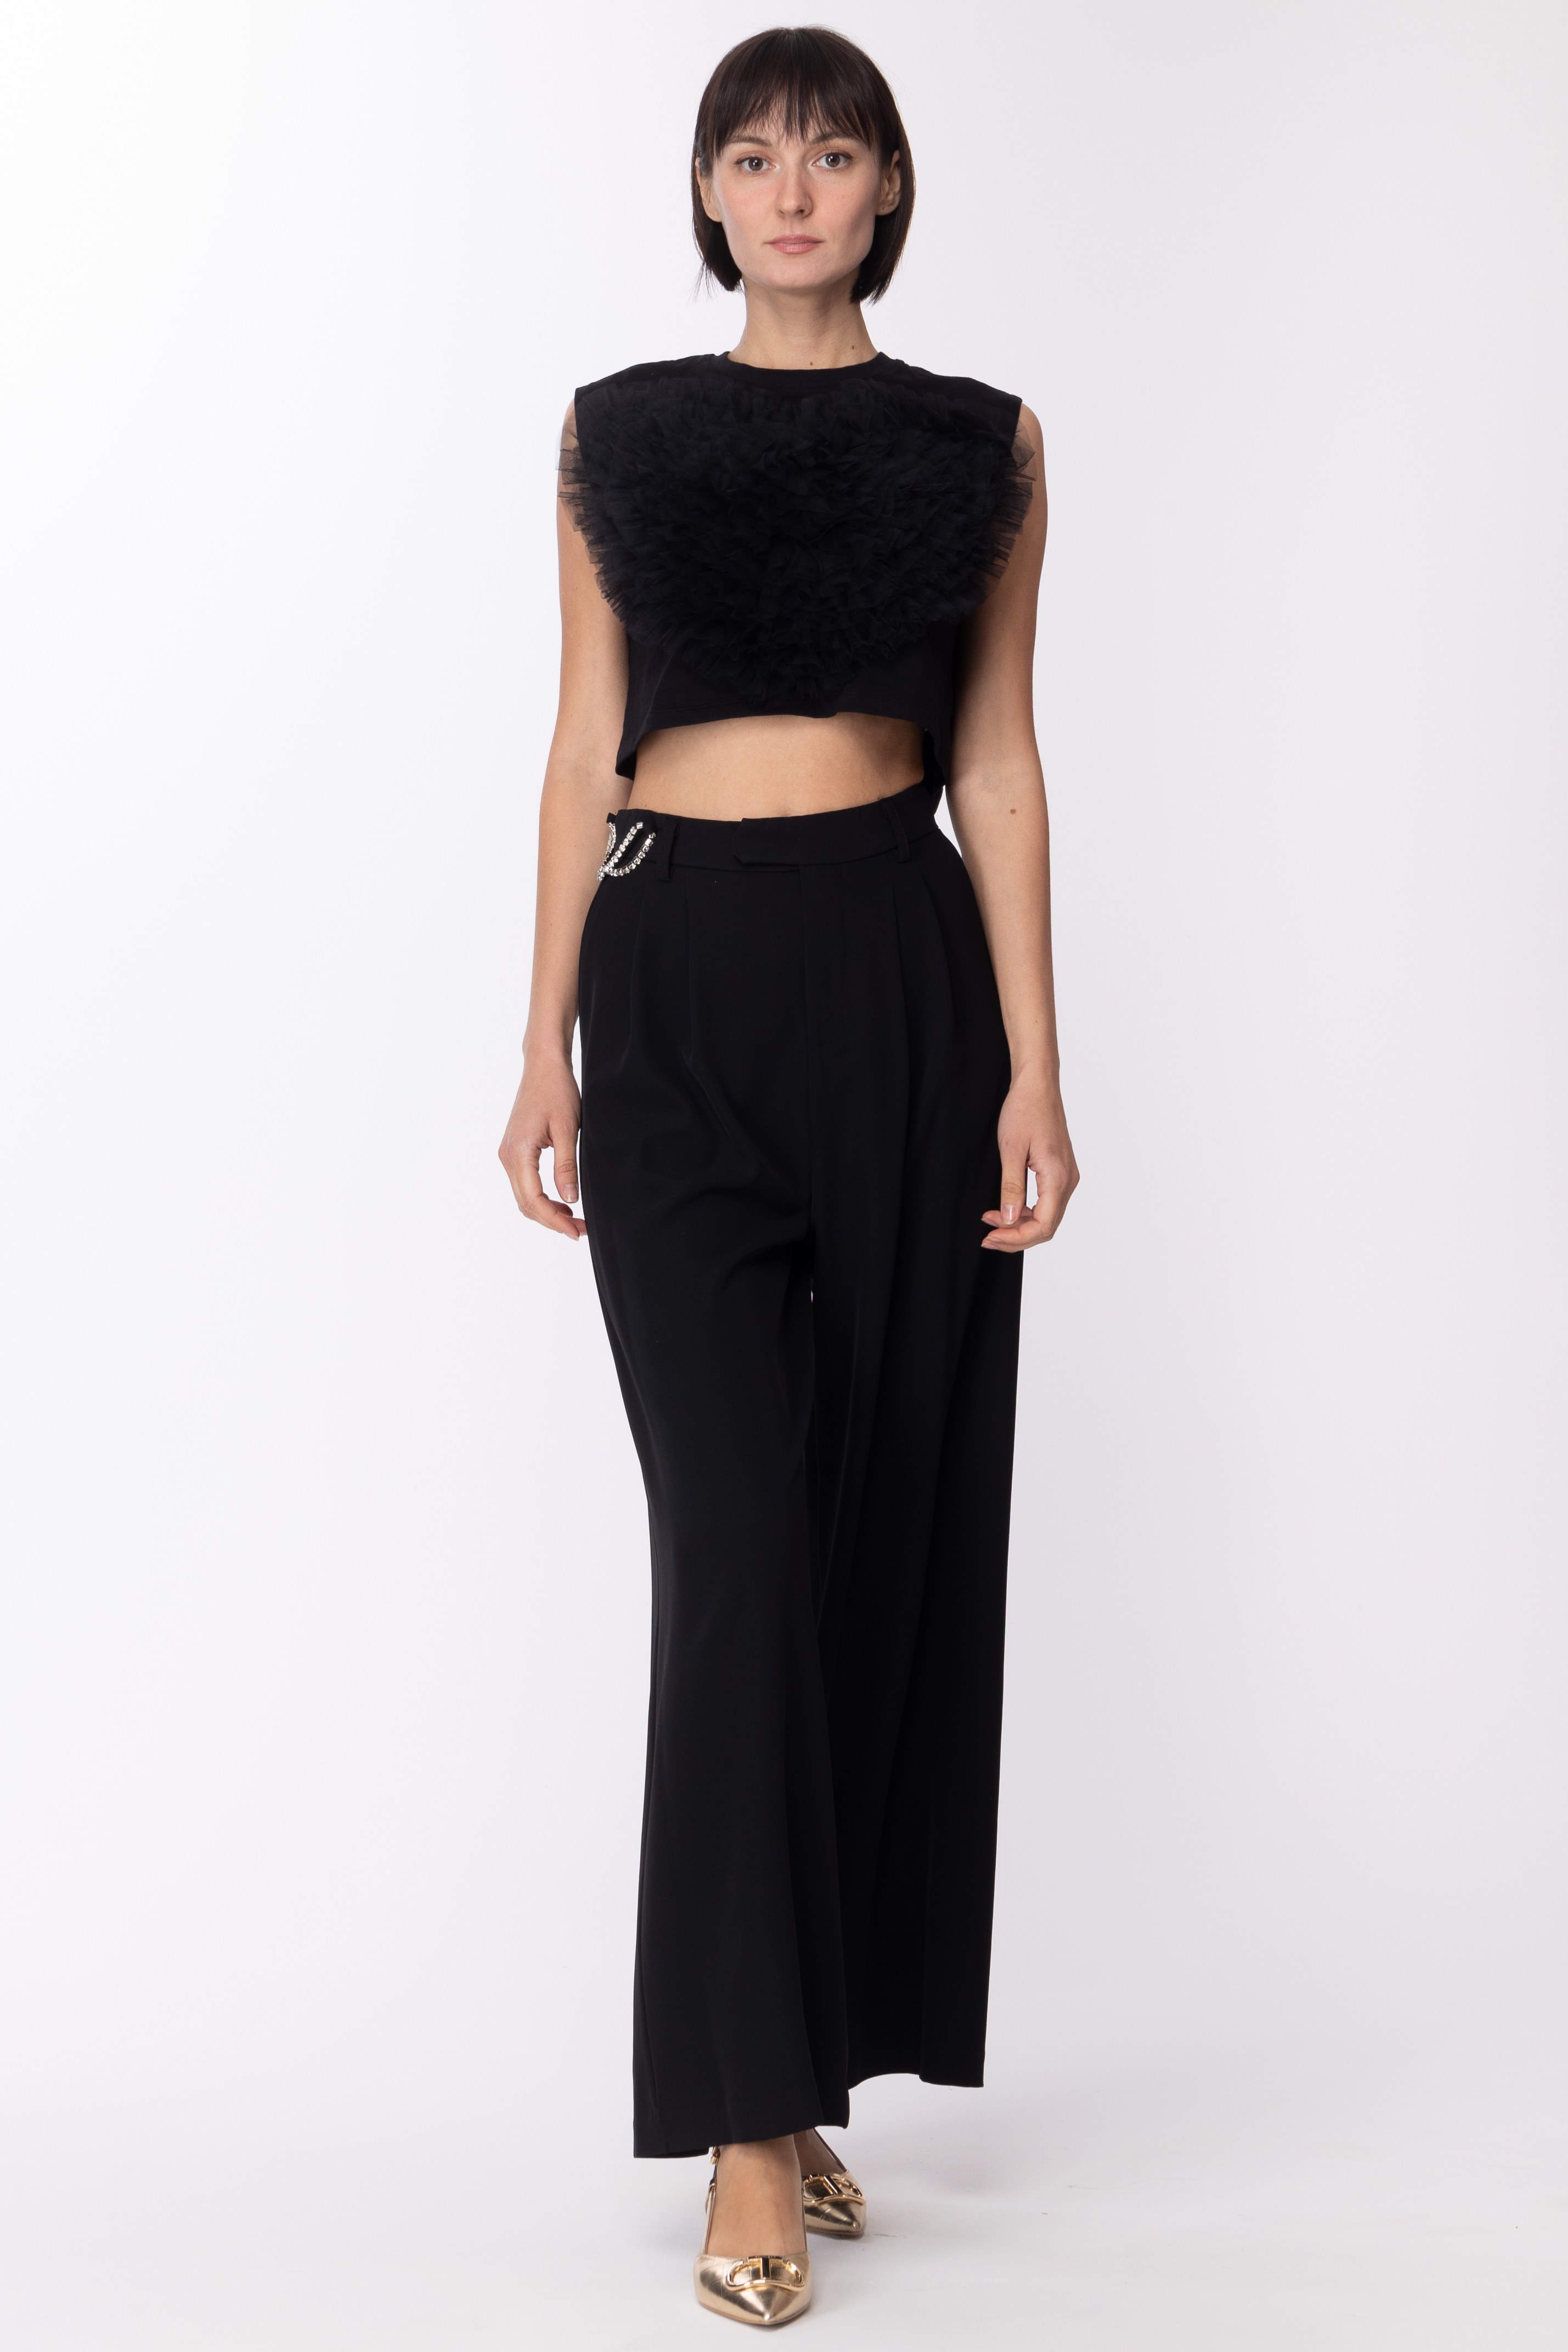 Preview: Aniye By Dolly crop top with tulle Black